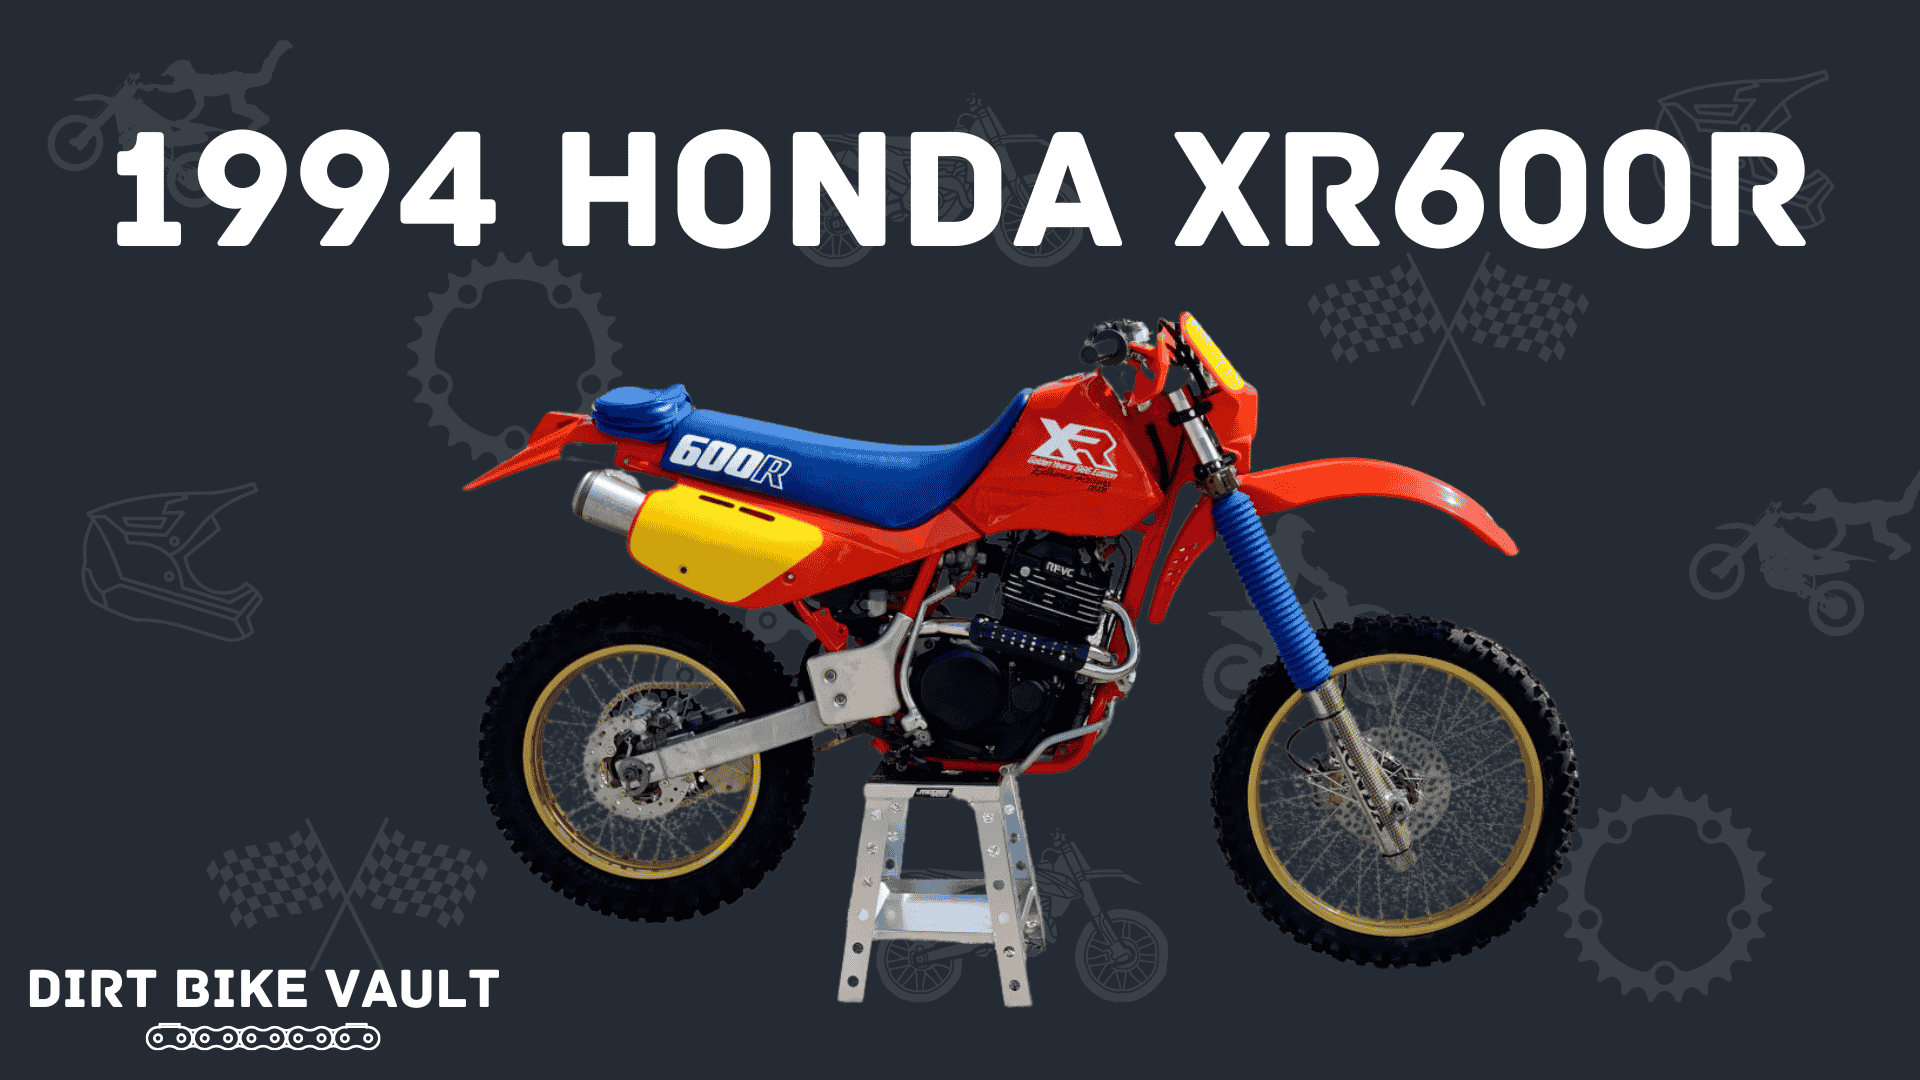 Honda XR600R 1994 in white text on gray background with 1994 Honda XR600R dirt bike on a silver stand